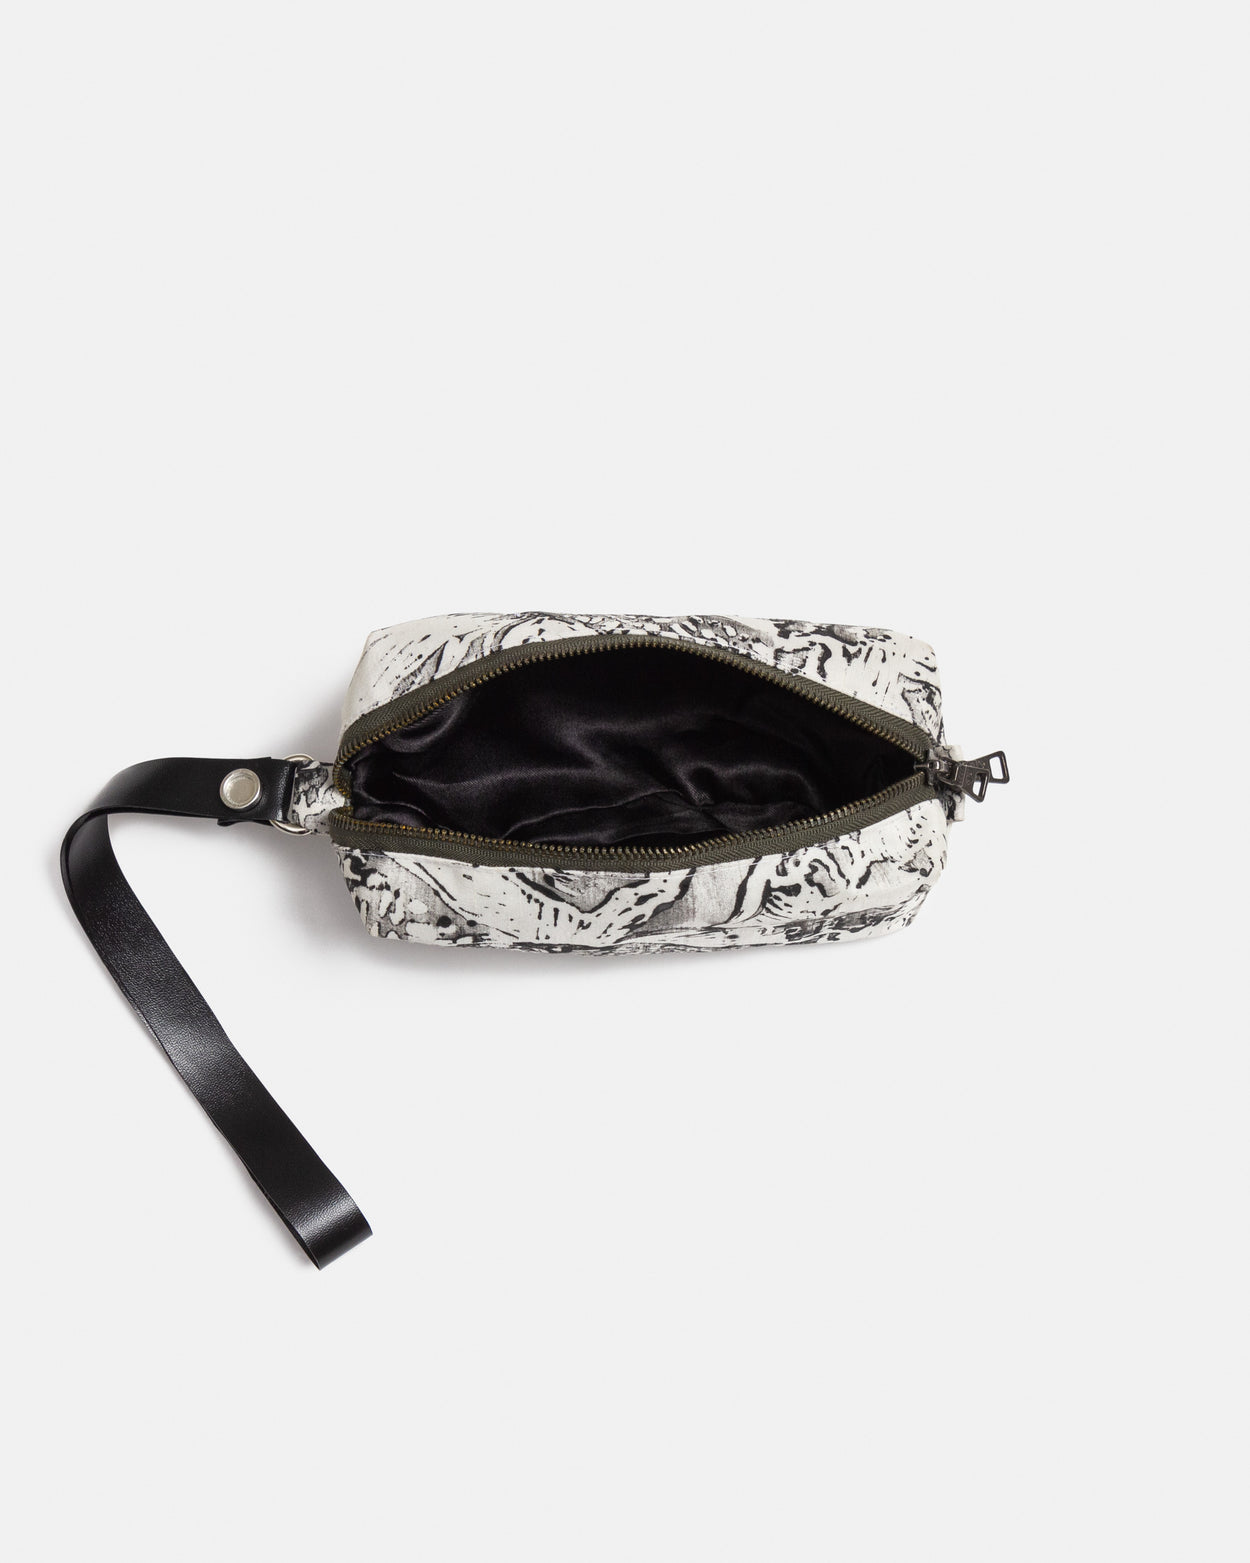 The B&W Block Printed Pouch